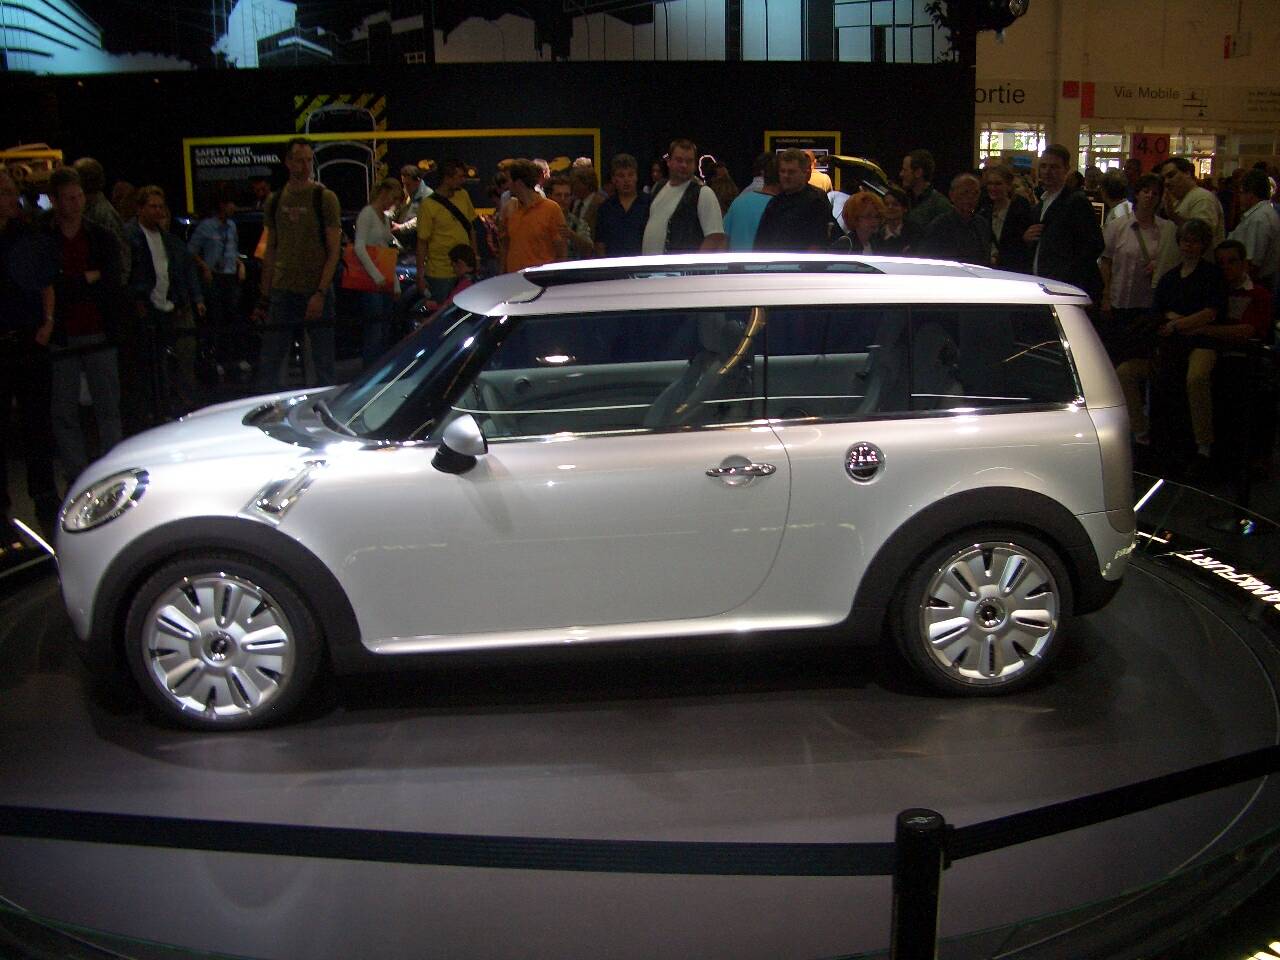 a mini - compact car on display at a vehicle show